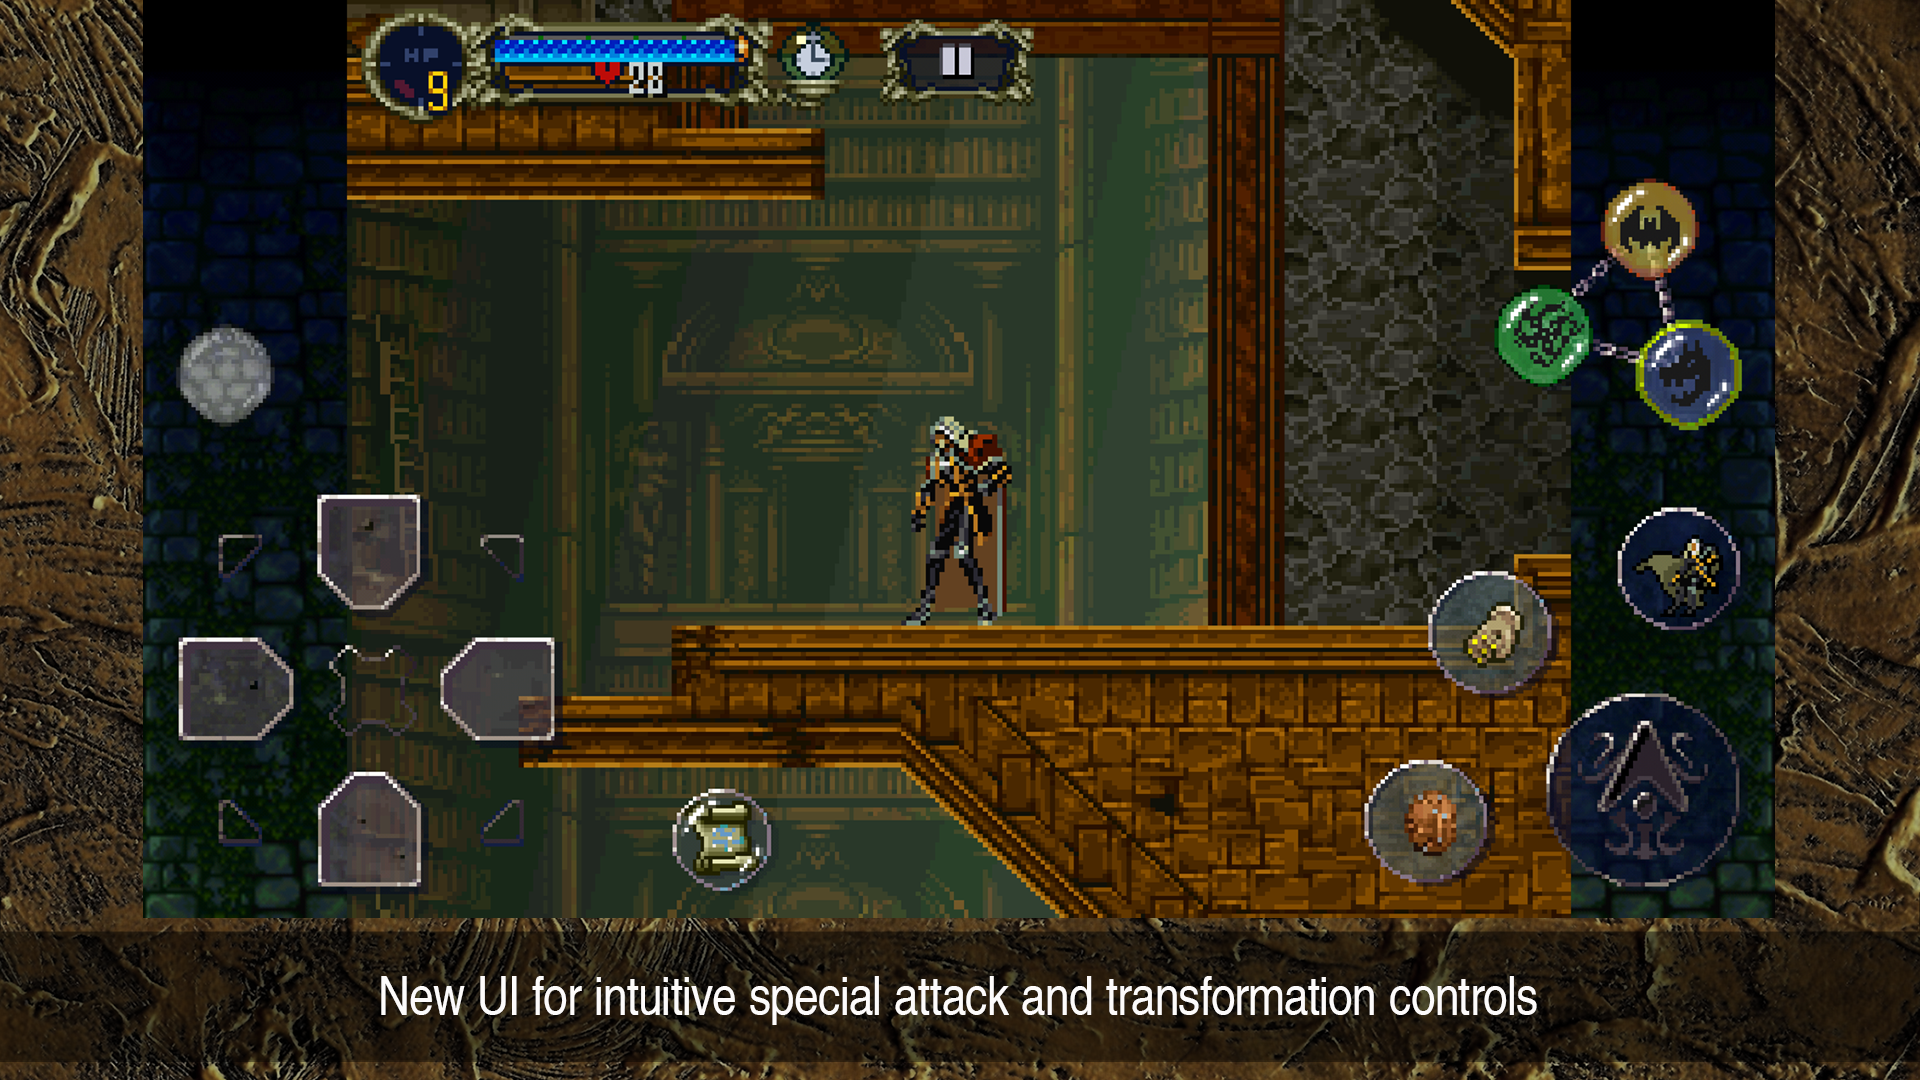 The Castleania game showing the UI for attack and transformation controls.